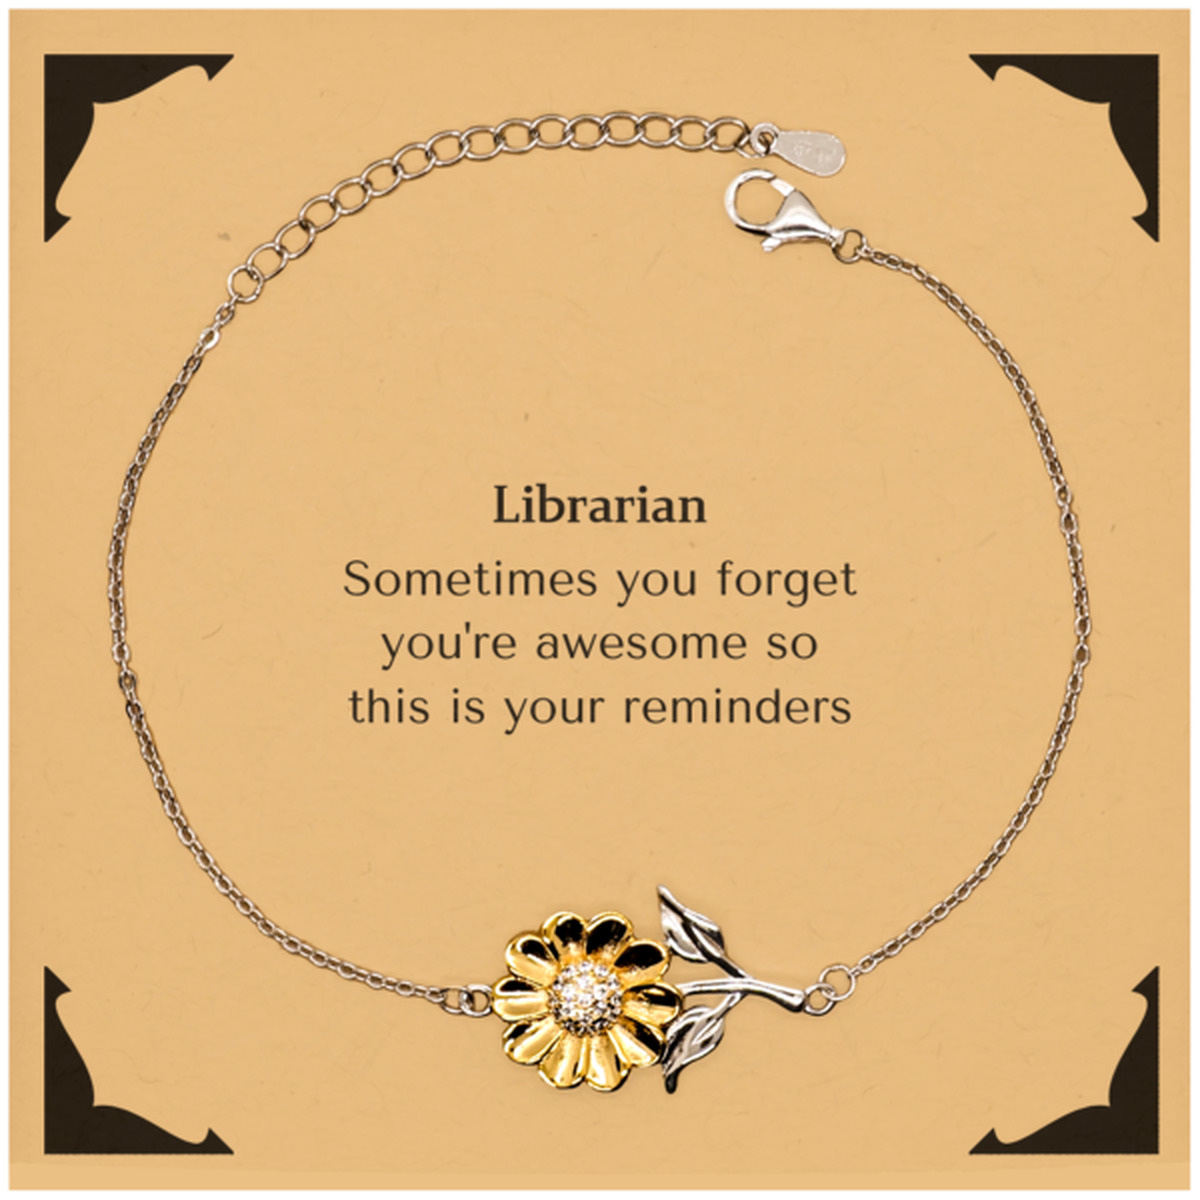 Sentimental Librarian Sunflower Bracelet, Librarian Sometimes you forget you're awesome so this is your reminders, Graduation Christmas Birthday Gifts for Librarian, Men, Women, Coworkers